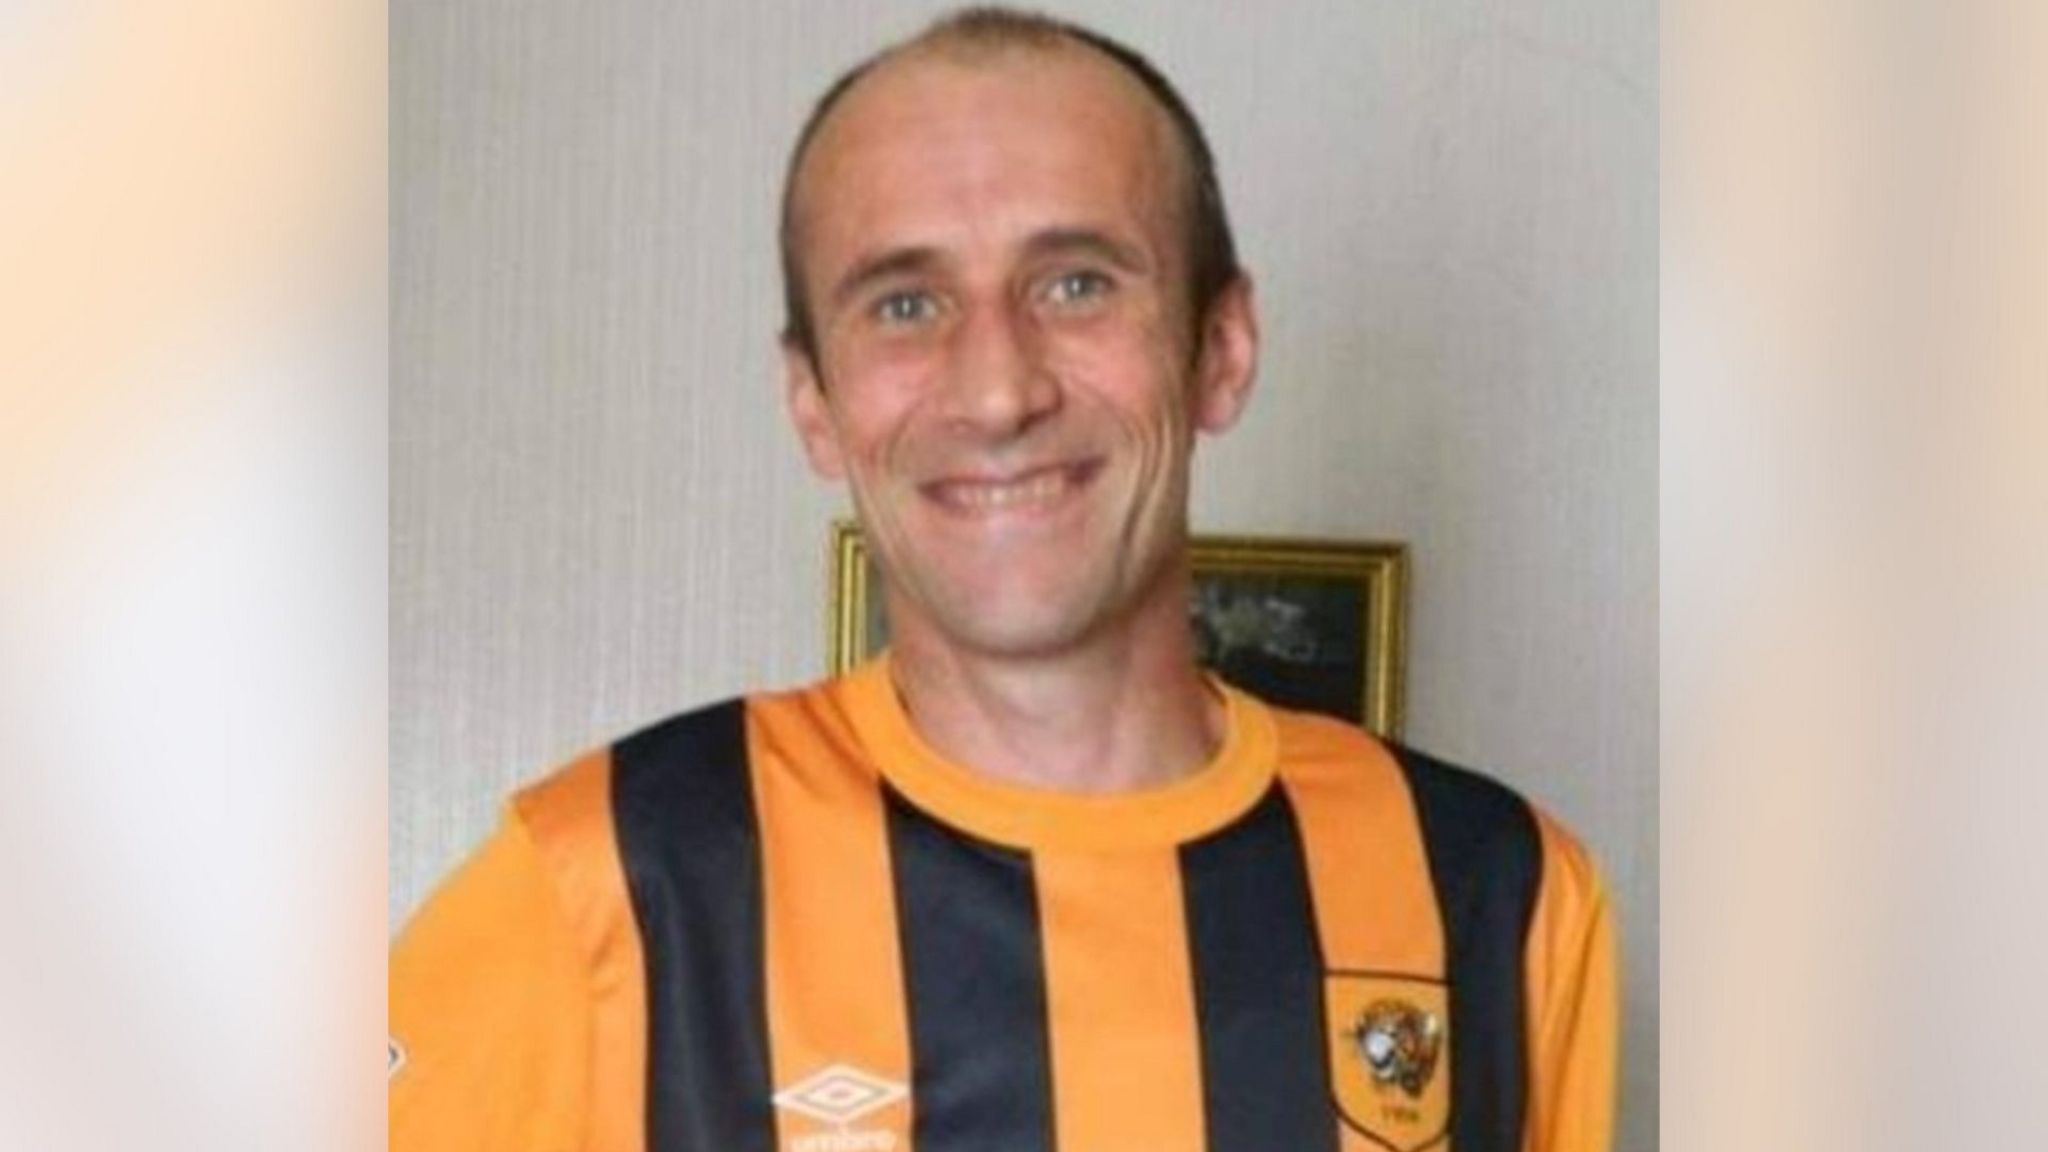 Christopher King, smiling and wearing a yellow and black striped Hull City football shirt. He is standing in front of a painting. 